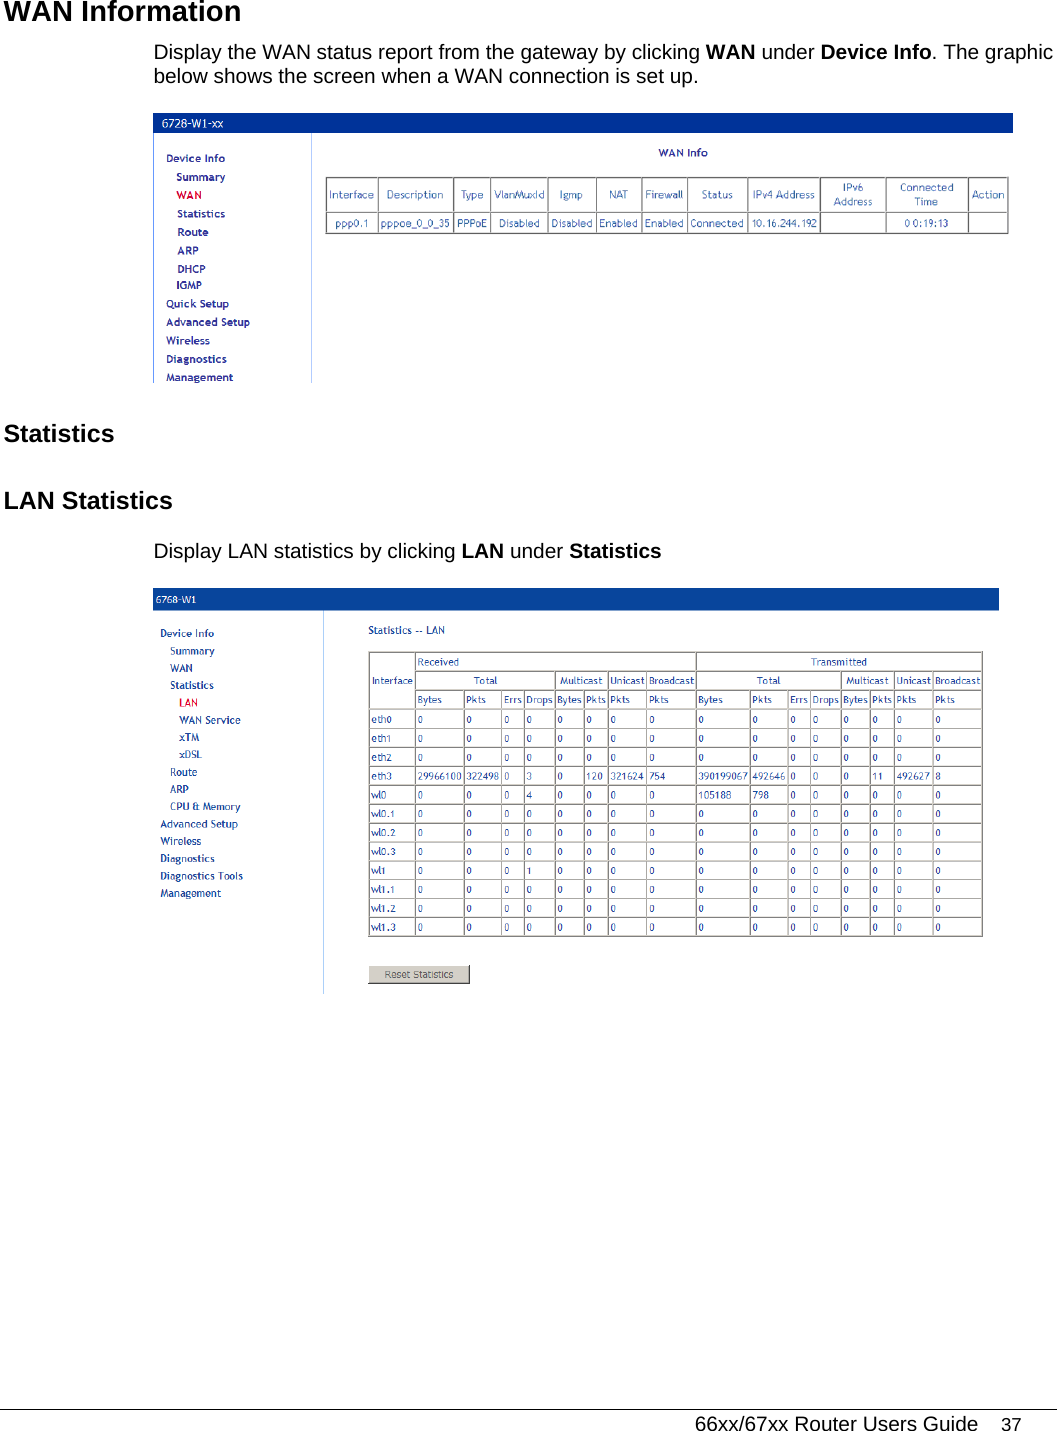   66xx/67xx Router Users Guide 37 WAN Information Display the WAN status report from the gateway by clicking WAN under Device Info. The graphic below shows the screen when a WAN connection is set up.   Statistics LAN Statistics Display LAN statistics by clicking LAN under Statistics    